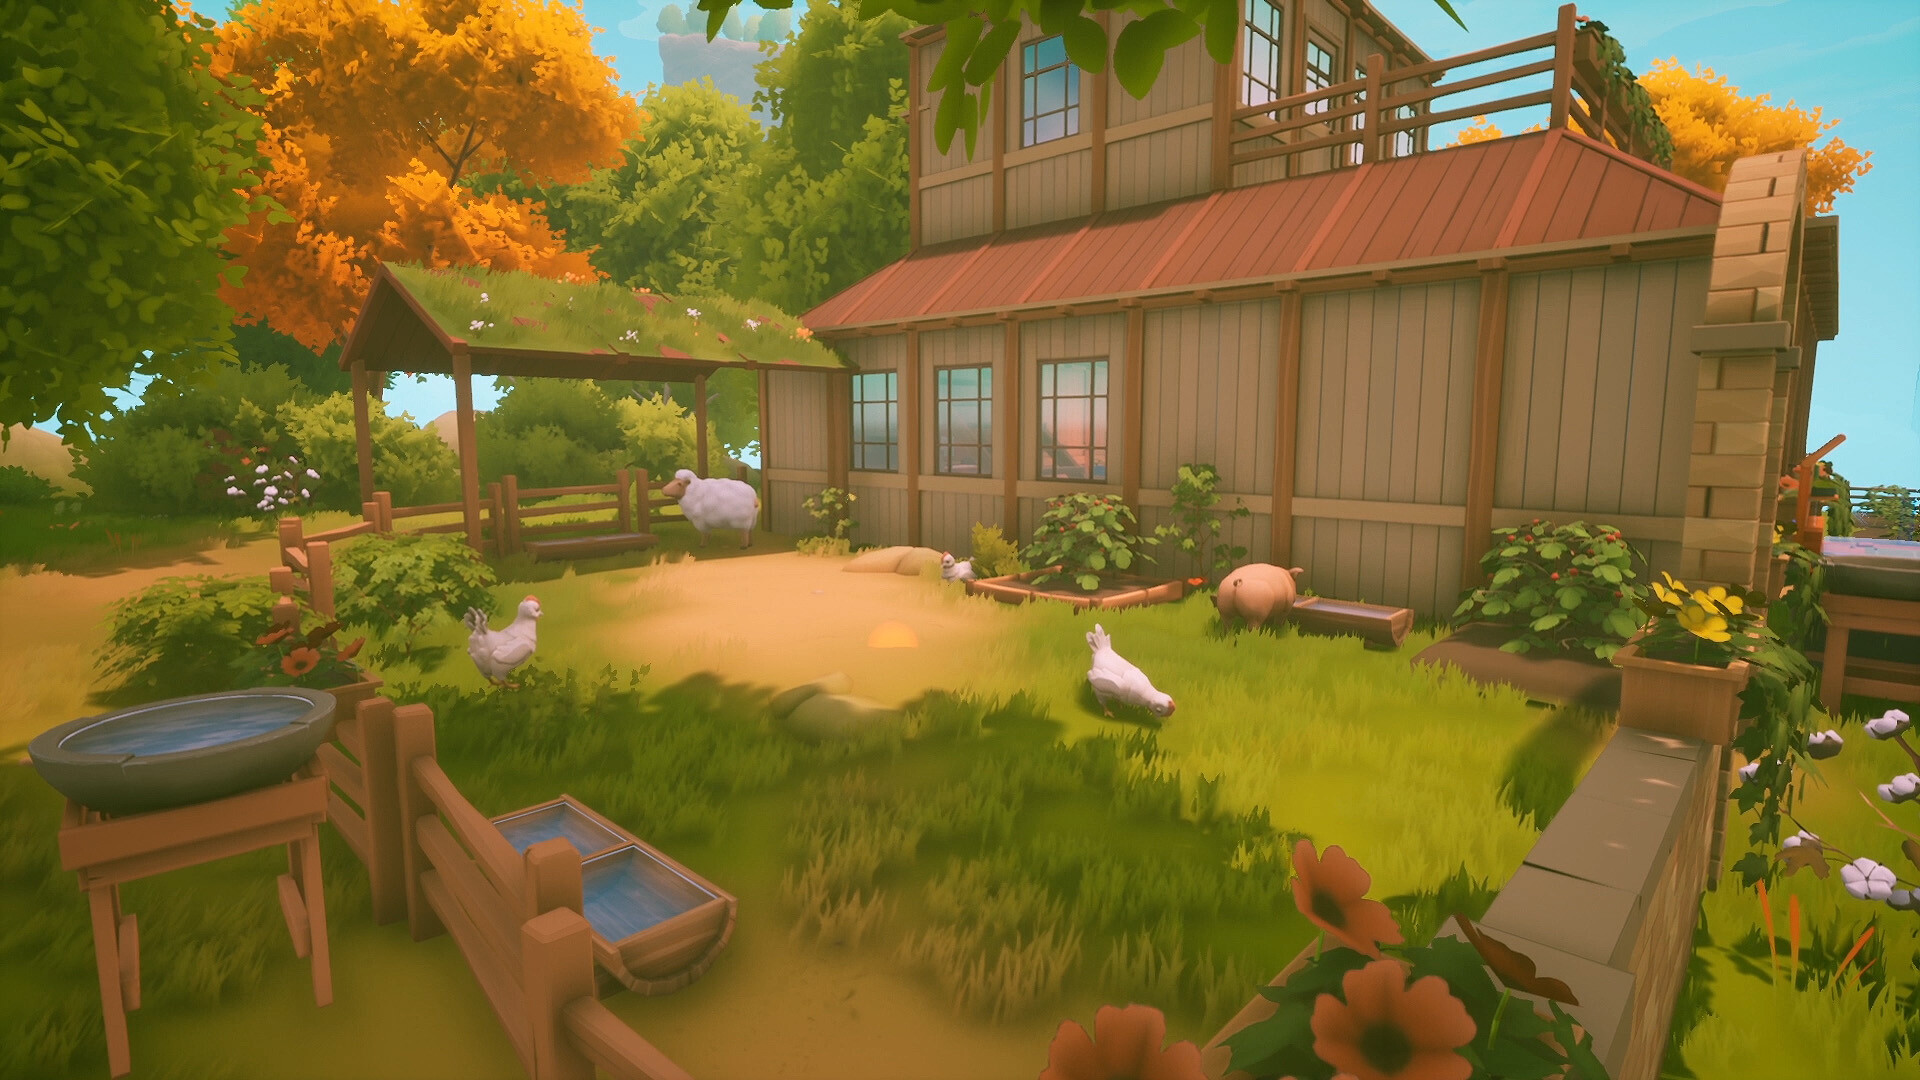 Cozy survival multiplayer game Solarpunk pulled in $330K US on successful  Kickstarter